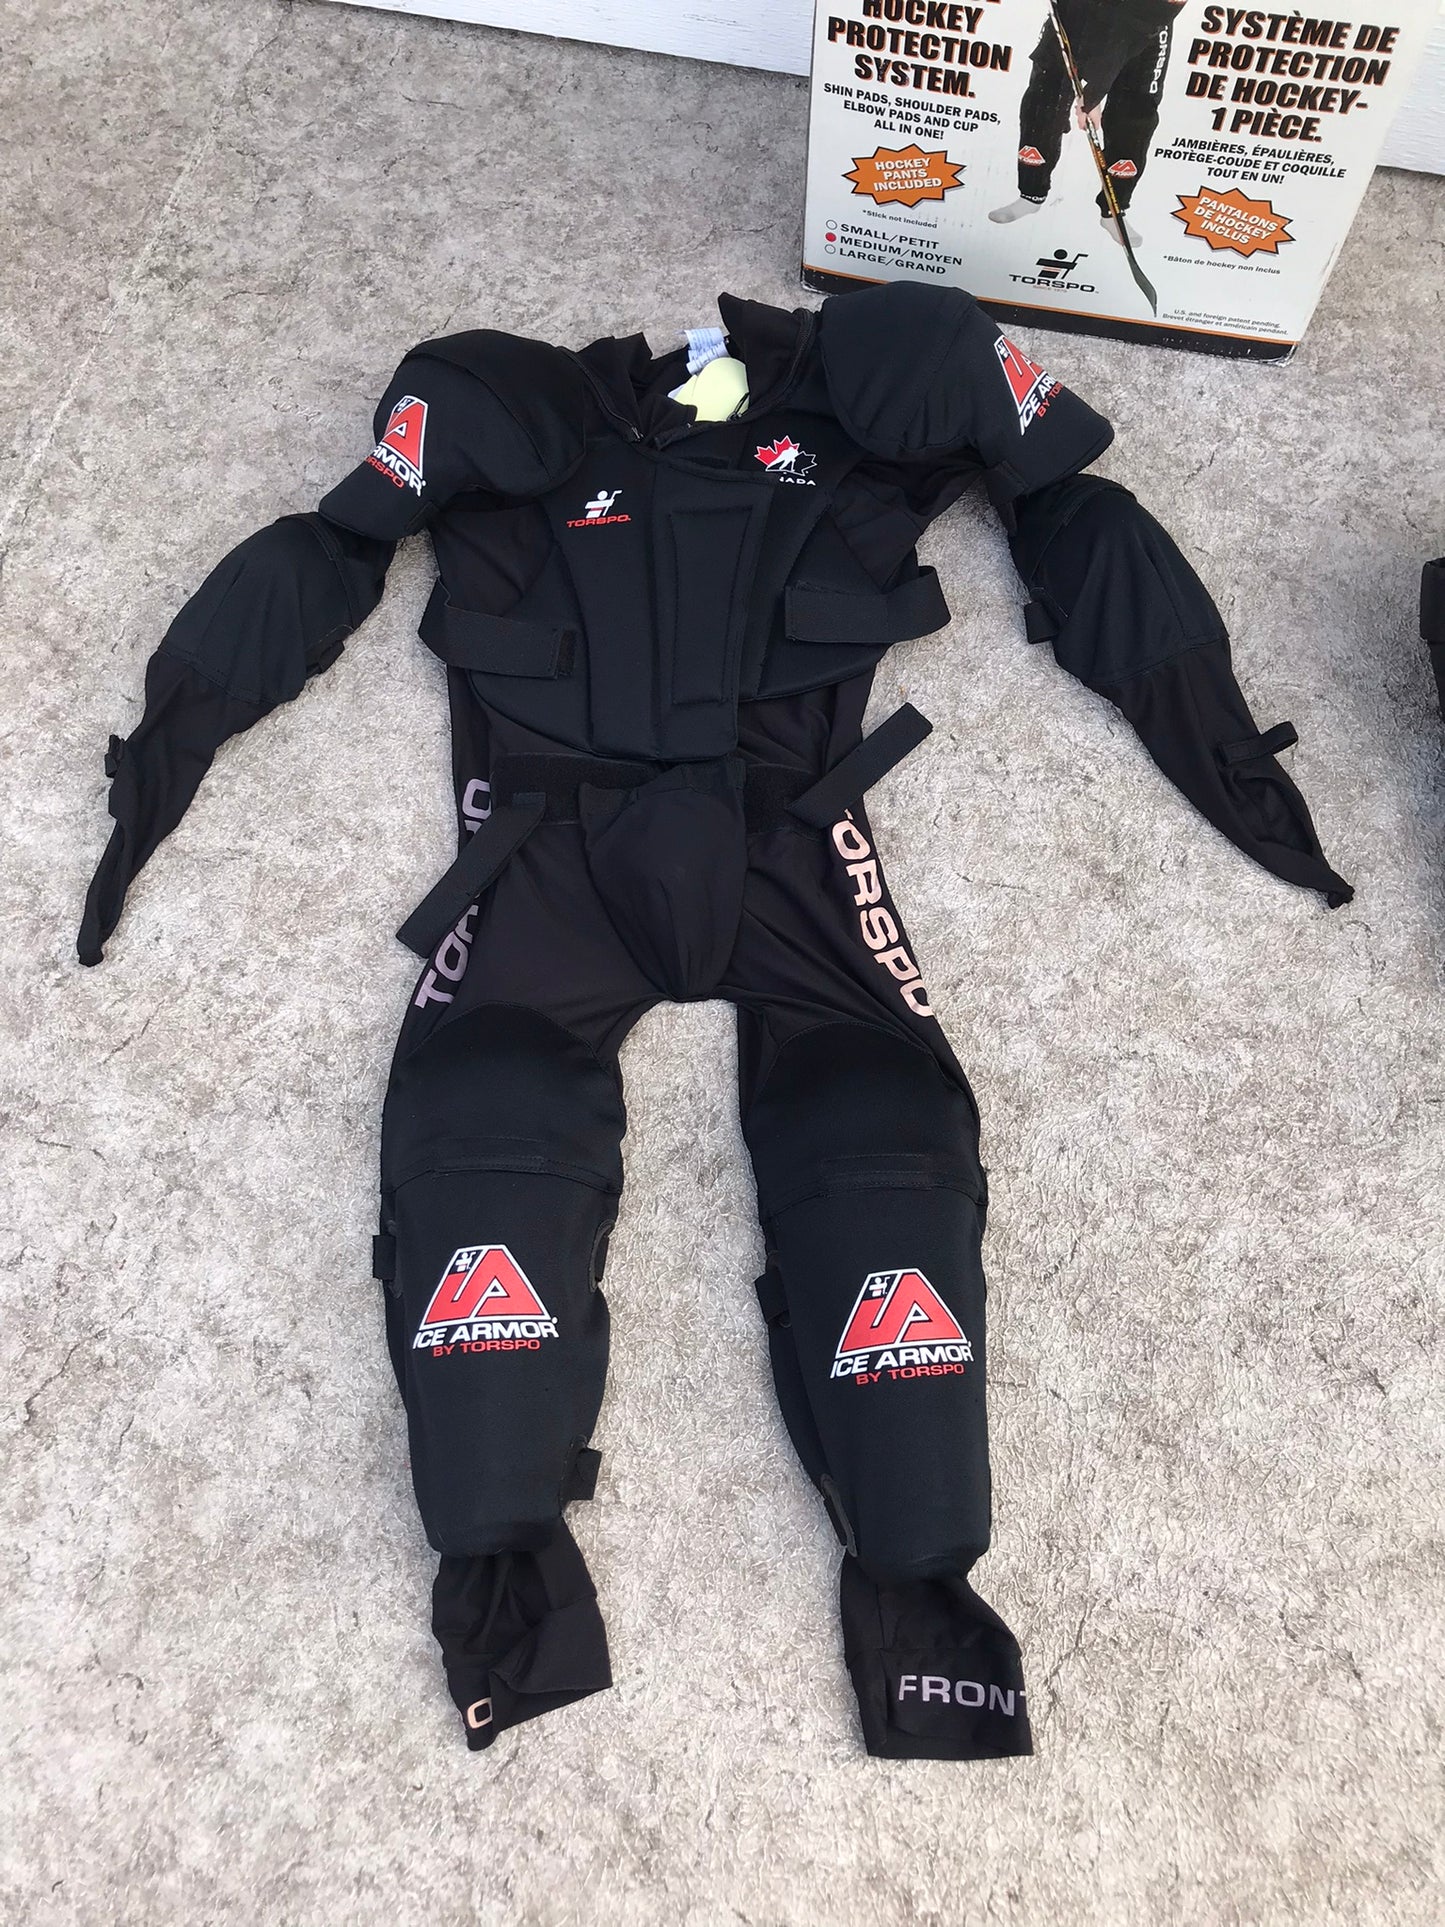 Hockey Set Child Size Youth Medium Age 6-8 Complete Hockey Protective Gear Pants Shin Shoulders Elbow and Cup New In Box